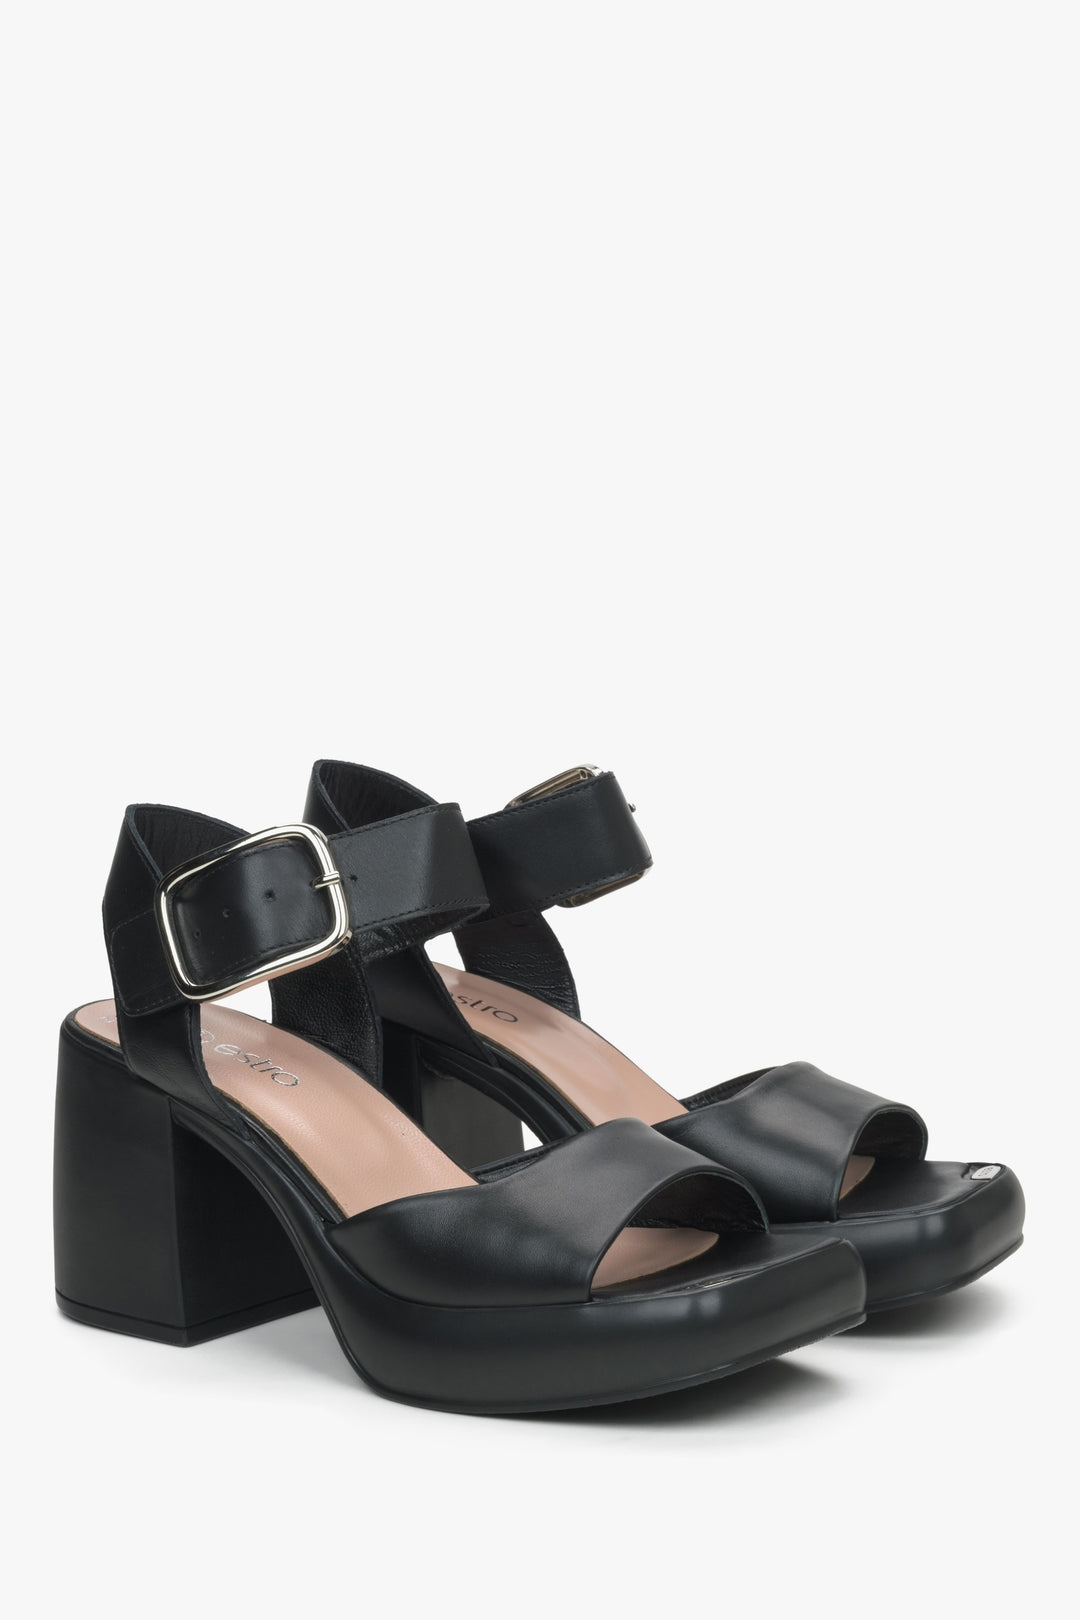 Women's black leather sandals with a block heel by Estro.